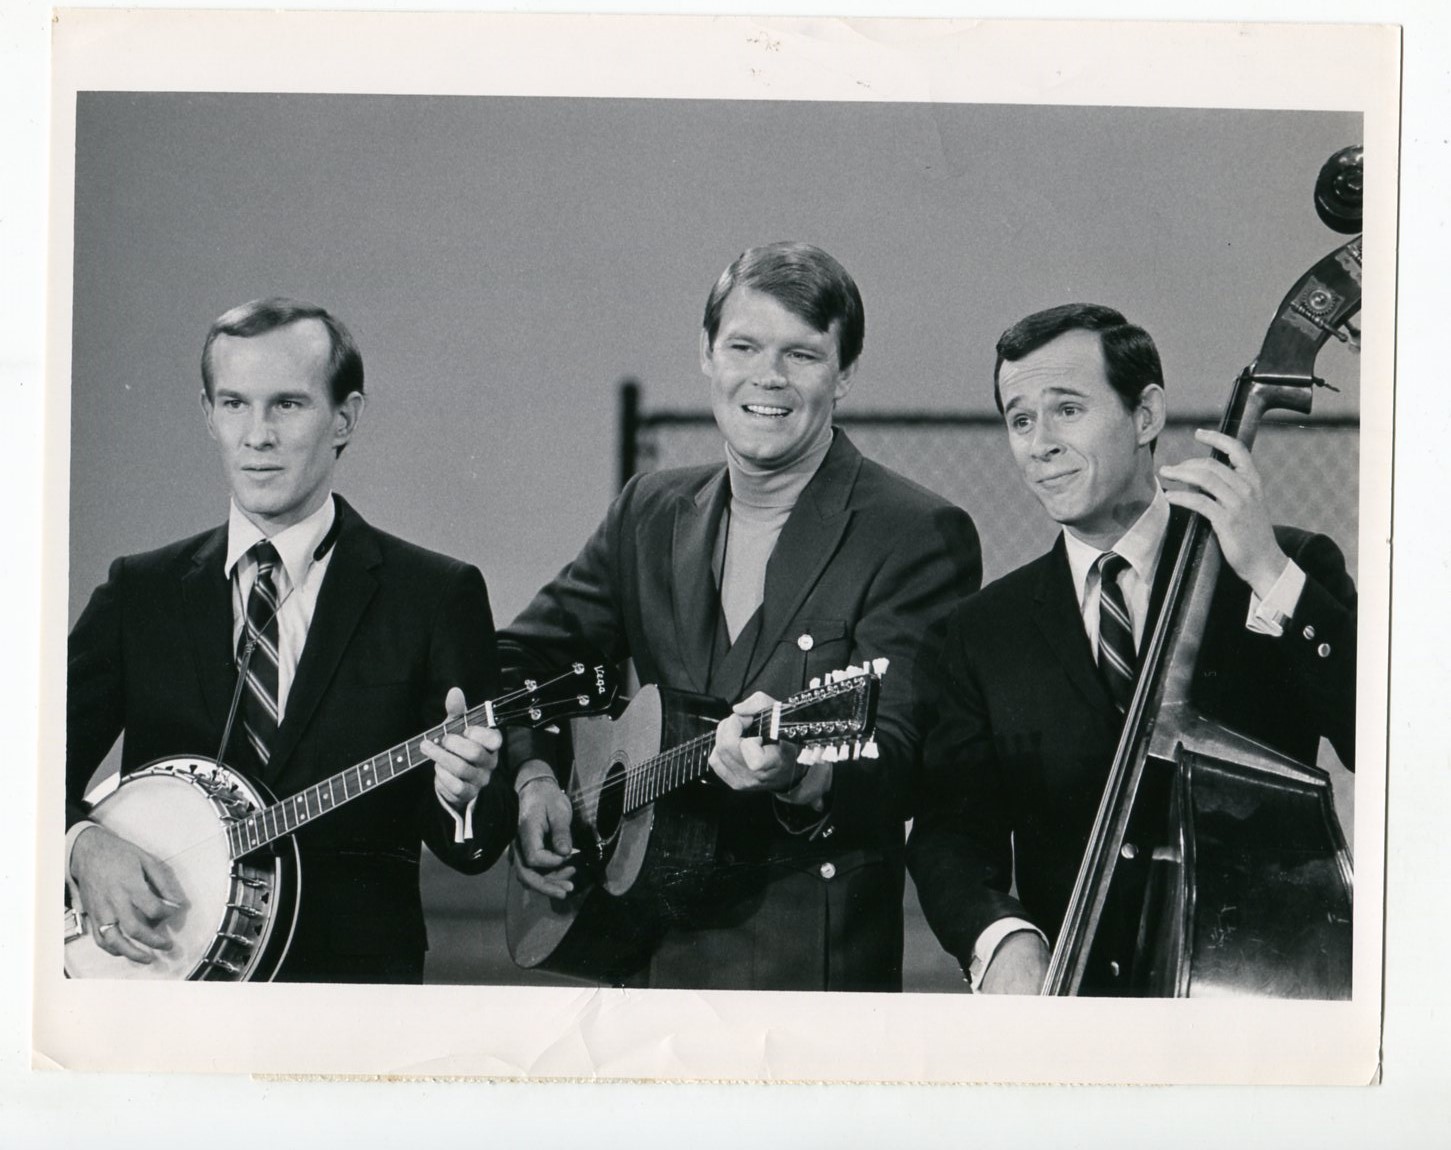 Smothers Brothers Comedy Hour Smothers Brothers Glen Campbell7x9 Bandw Still Vg Photograph Dta 